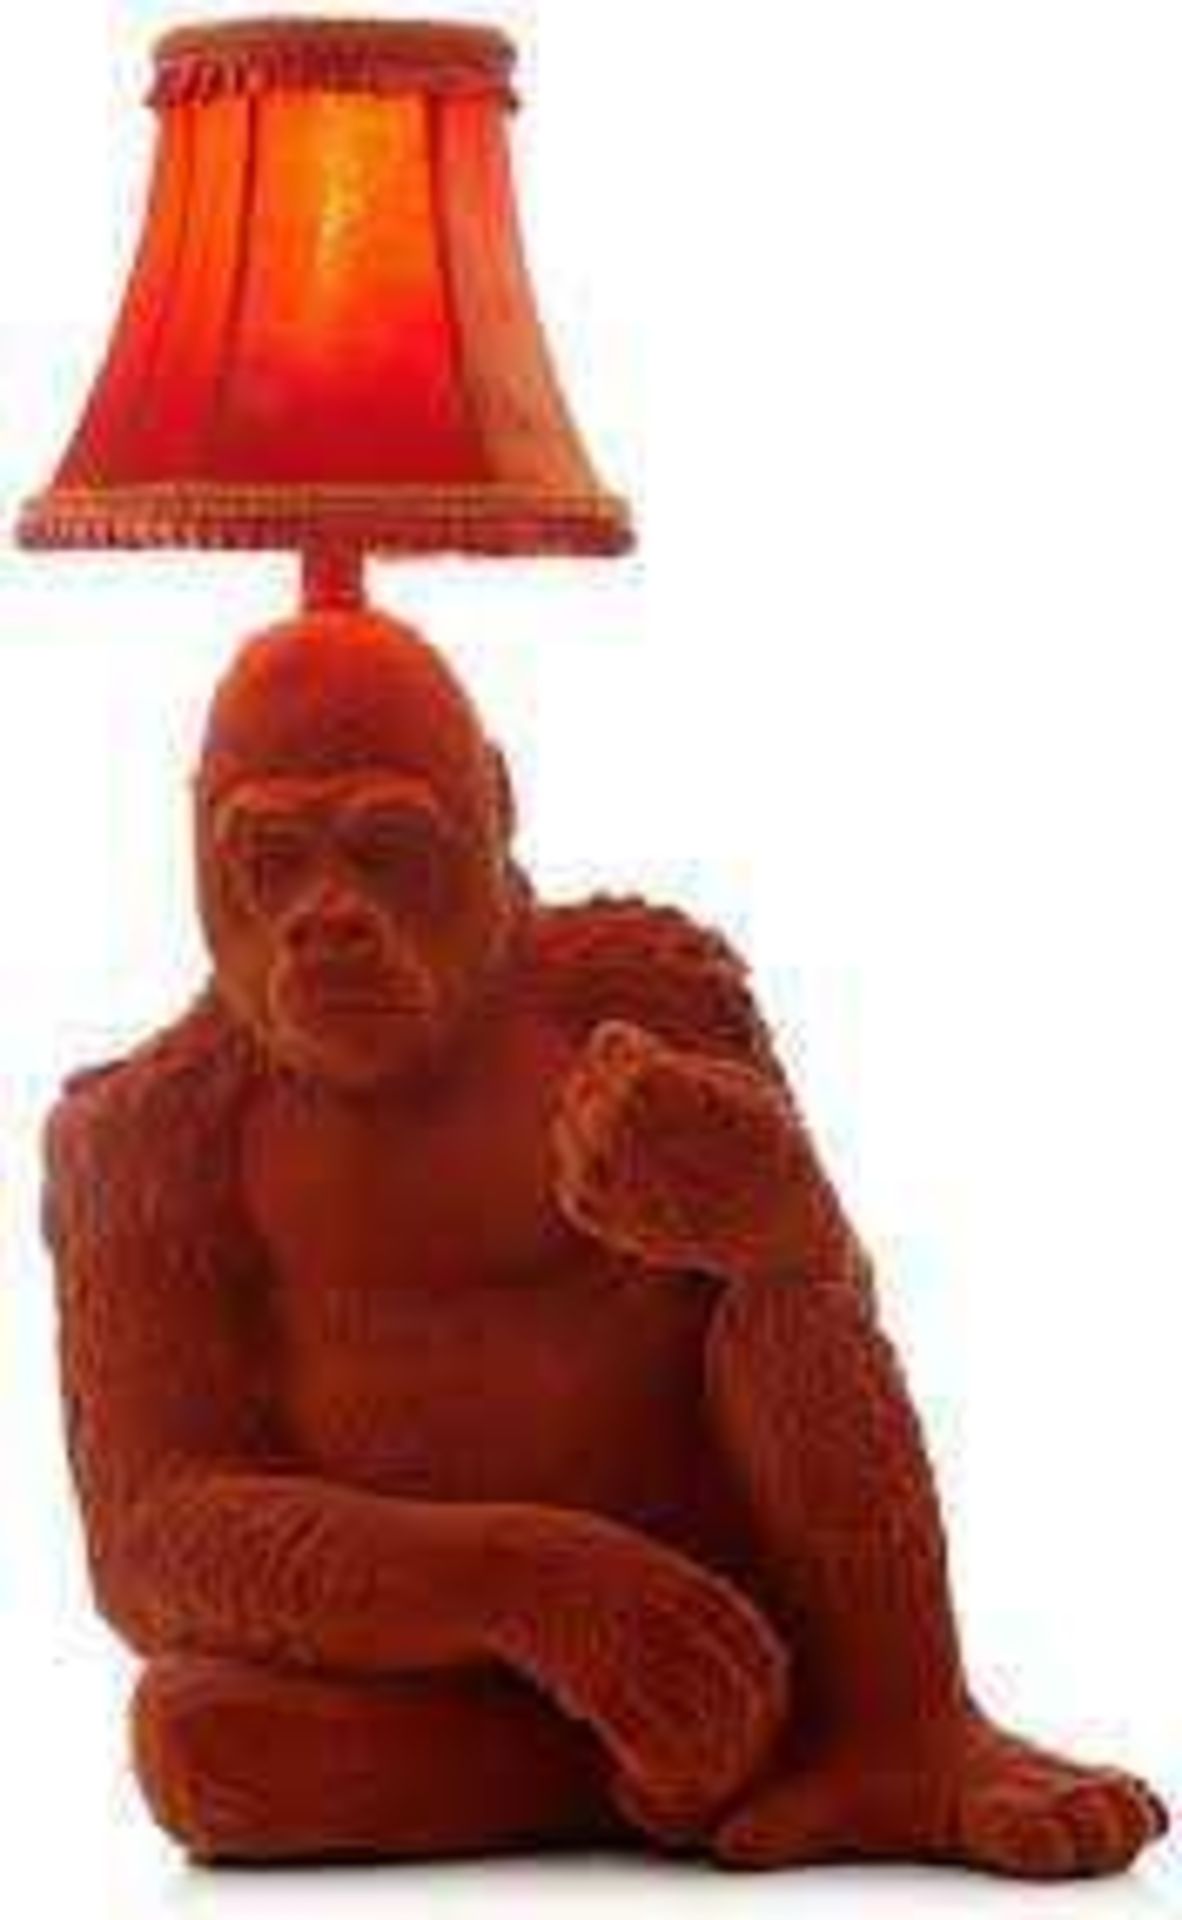 RRP £95 Unboxed Abigail Ahern Gorilla Lamp Untested - Image 2 of 2